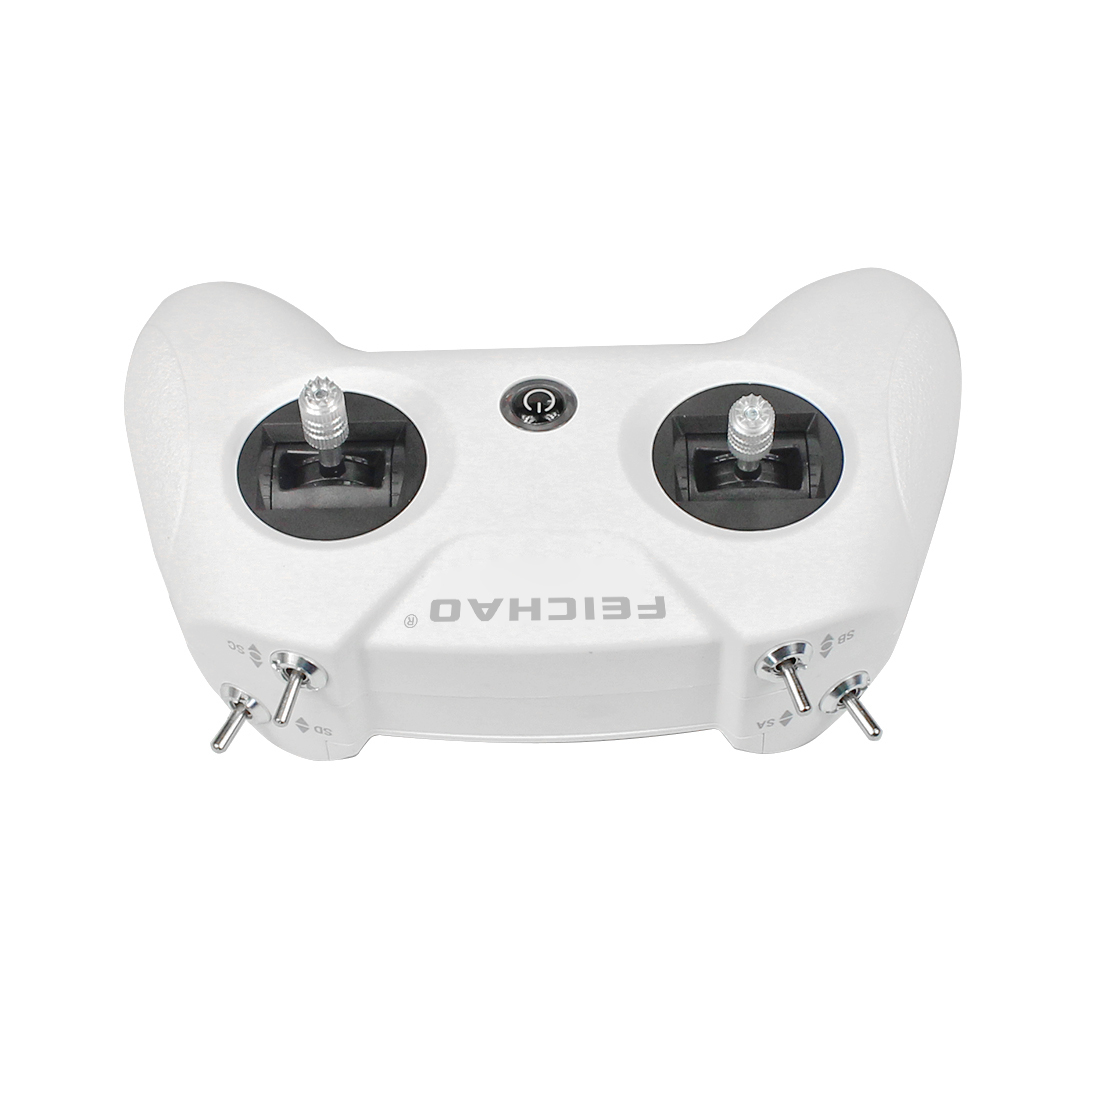 Details about   FEICHAO Mobula6 HD 1S 65mm Brushless Quadcopter LiteRadio Remote Controller 